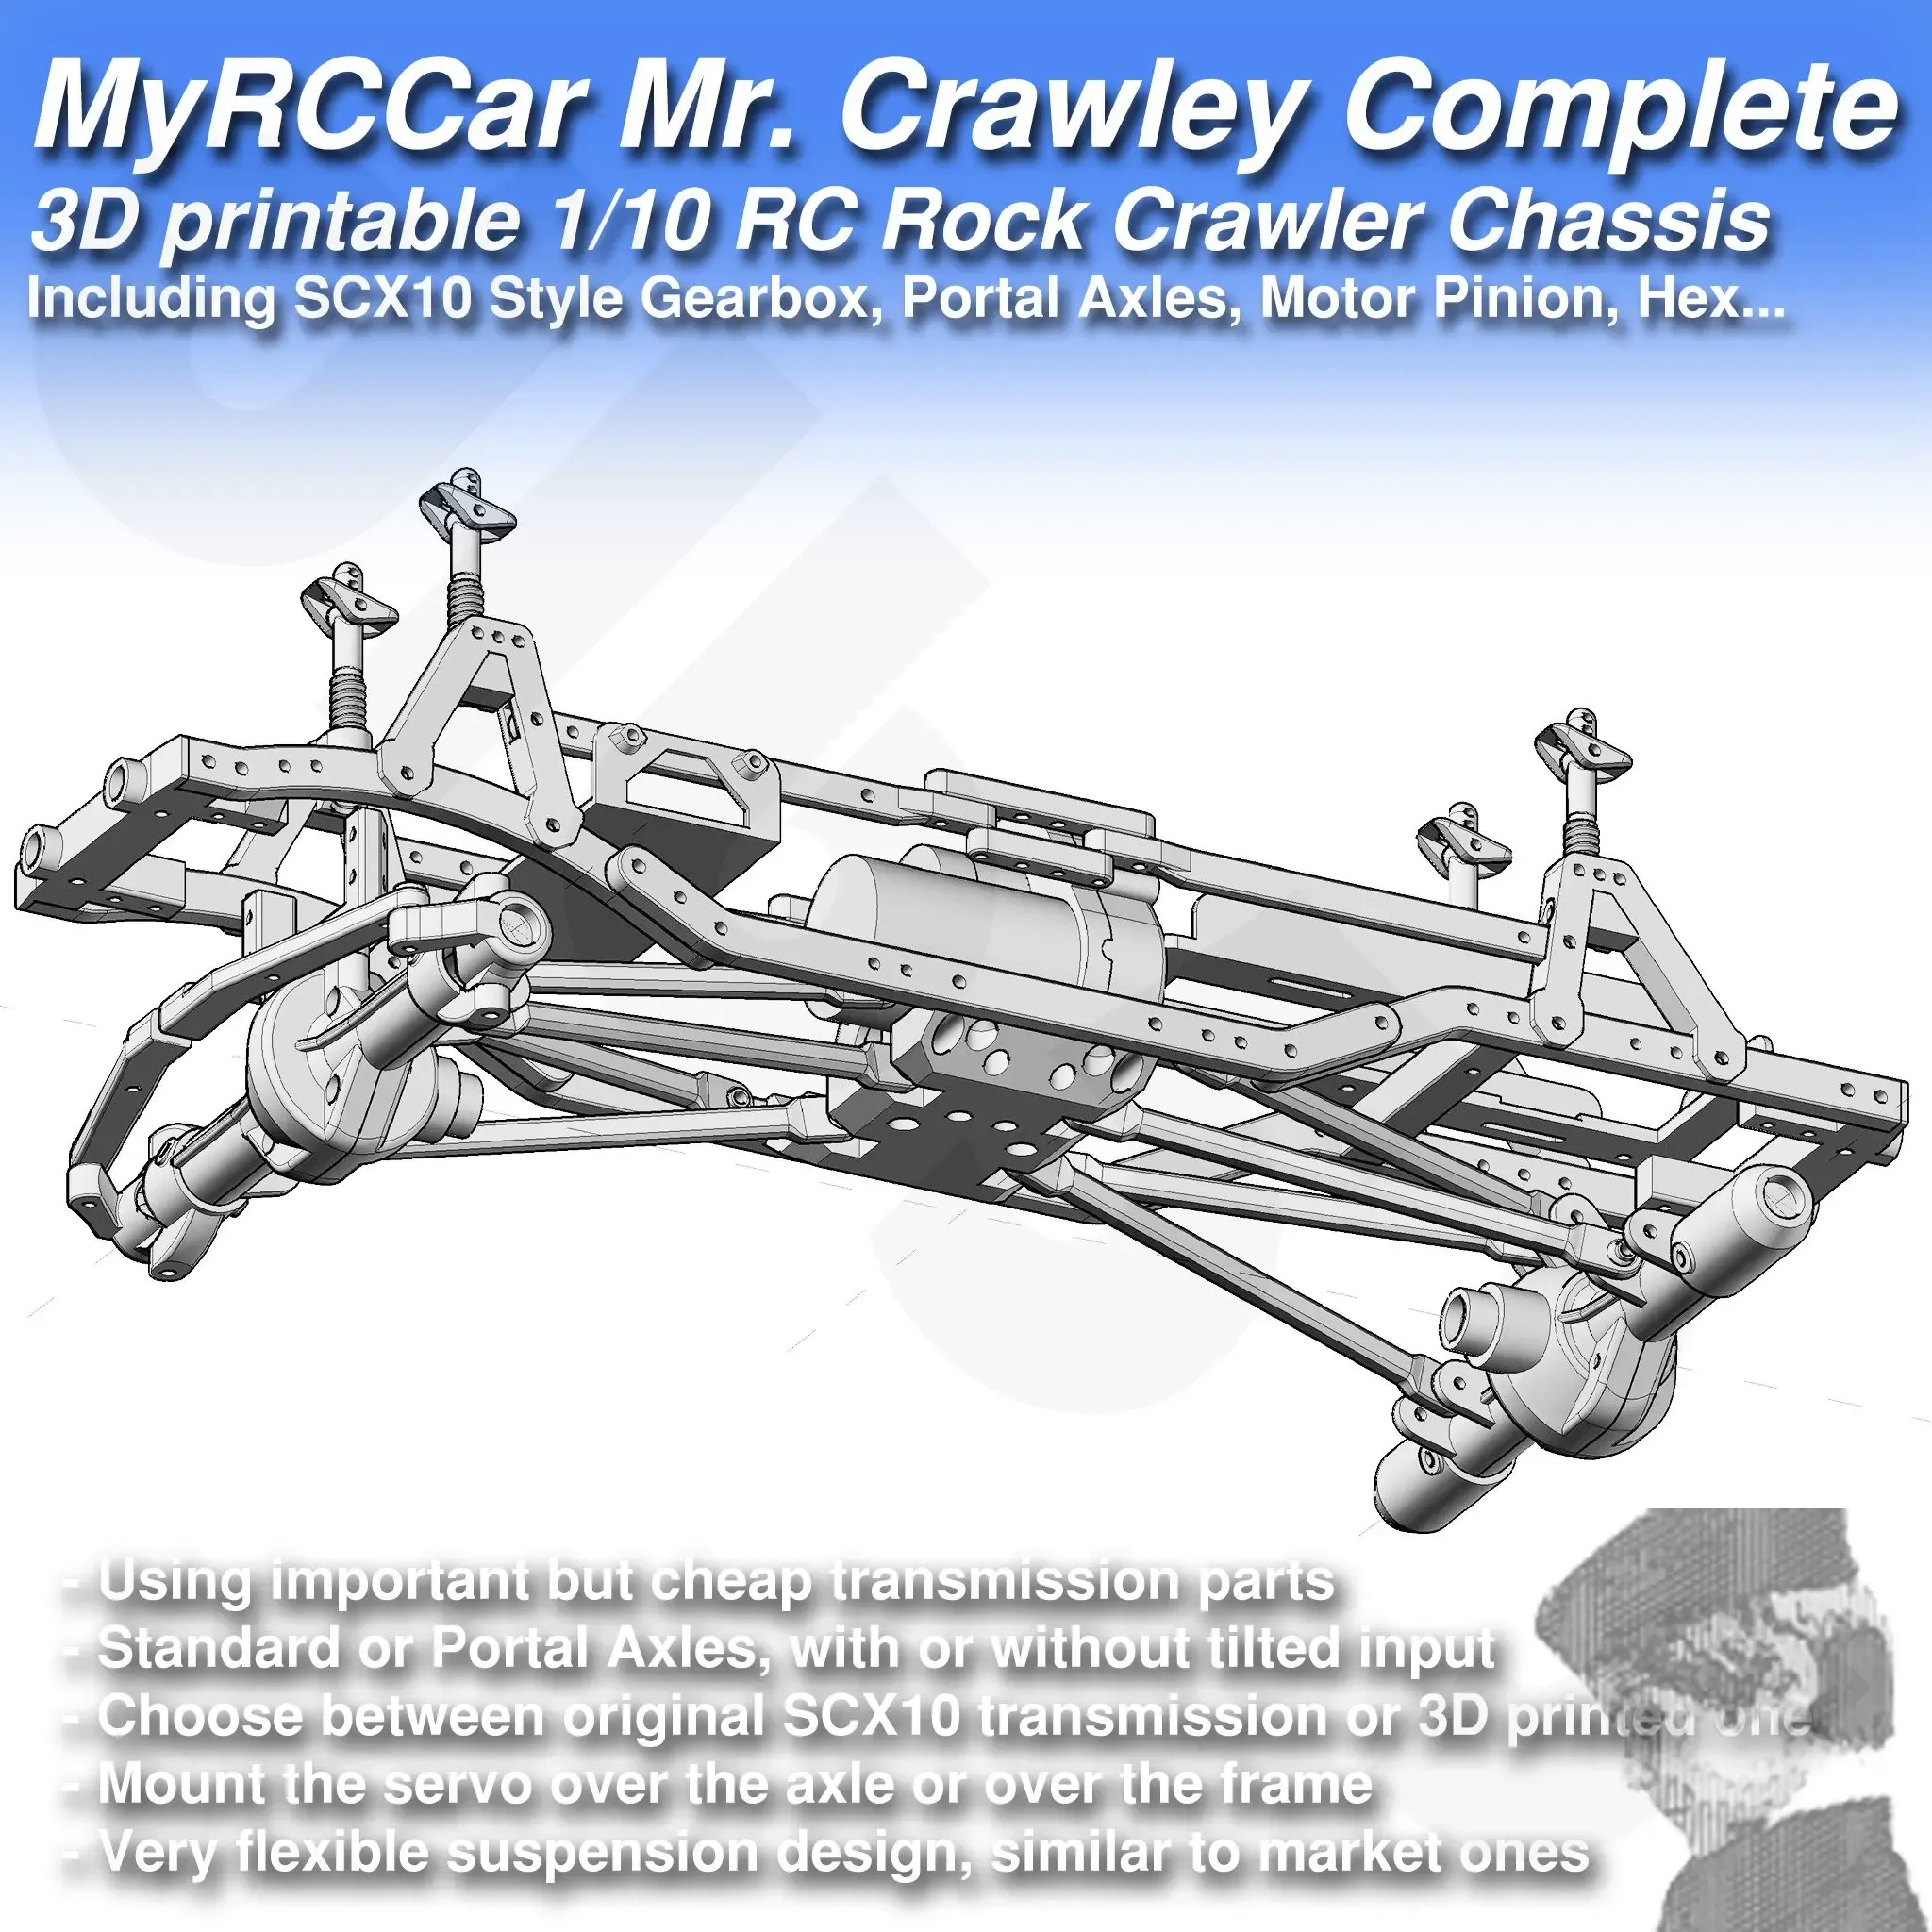 MyRCCar Mr. Crawley Complete. 1/10  RC Rock Crawler Chassis